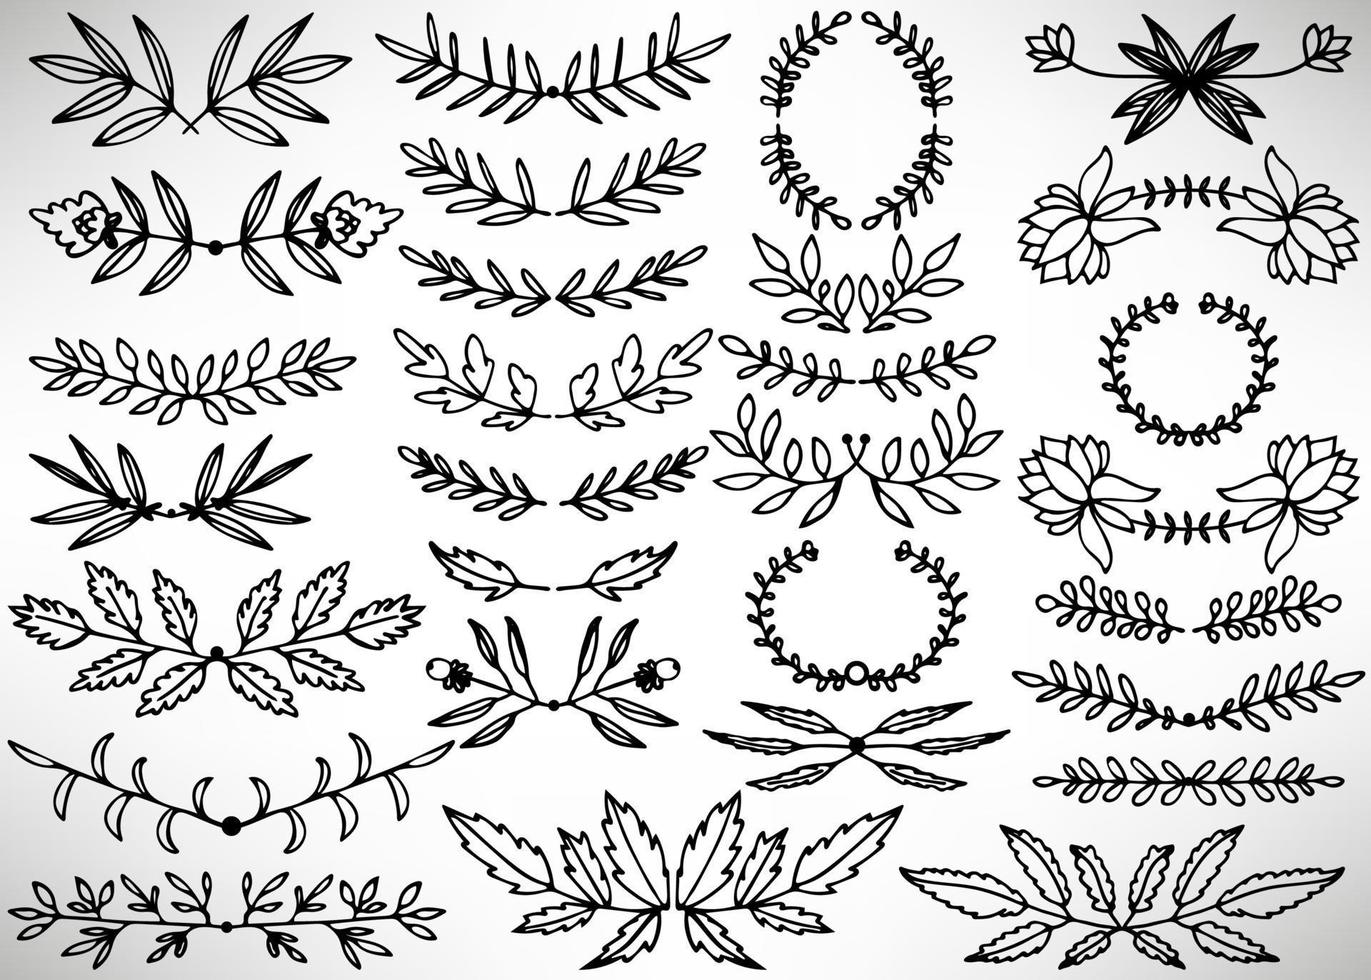 Big Floral Set of black hand drawn dividers, laurel wreaths, leaves, flowers, branches isolated on white. Collection of flourish elements for design. vector